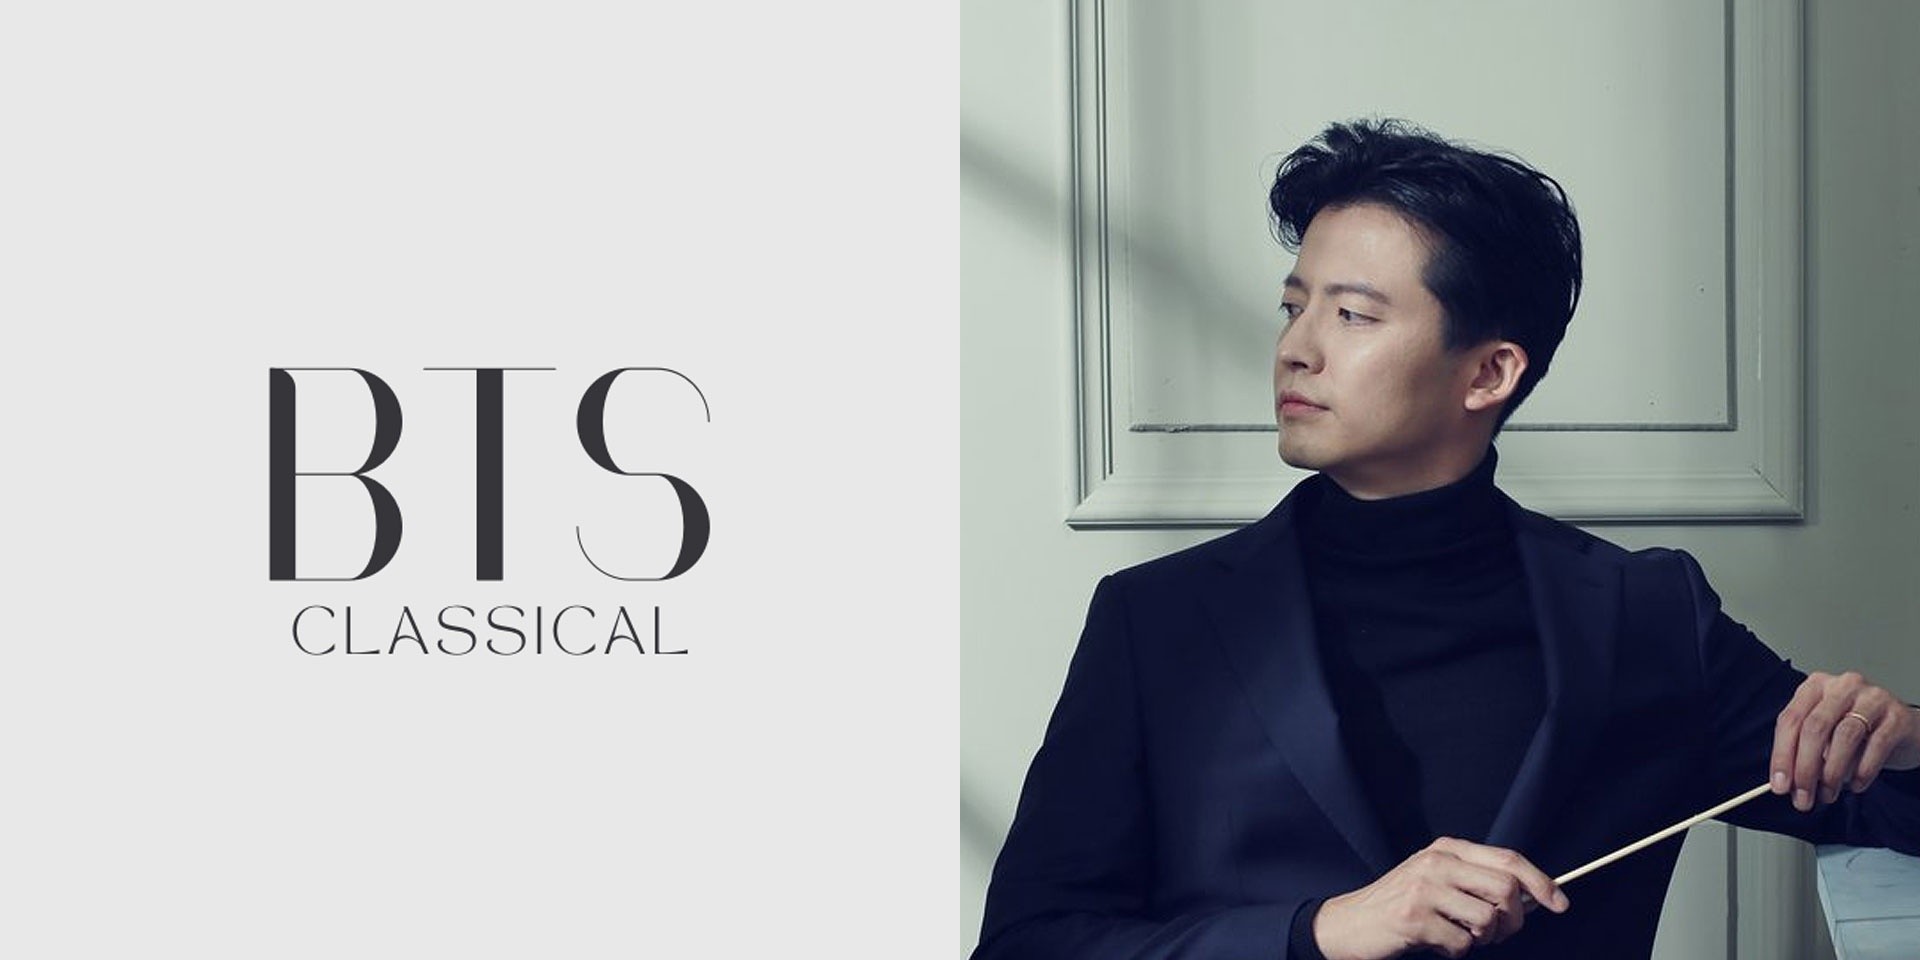 Composer and conductor Henry Cheng re-imagines BTS' discography as a classical suite with 'Suite for ARMY' – listen